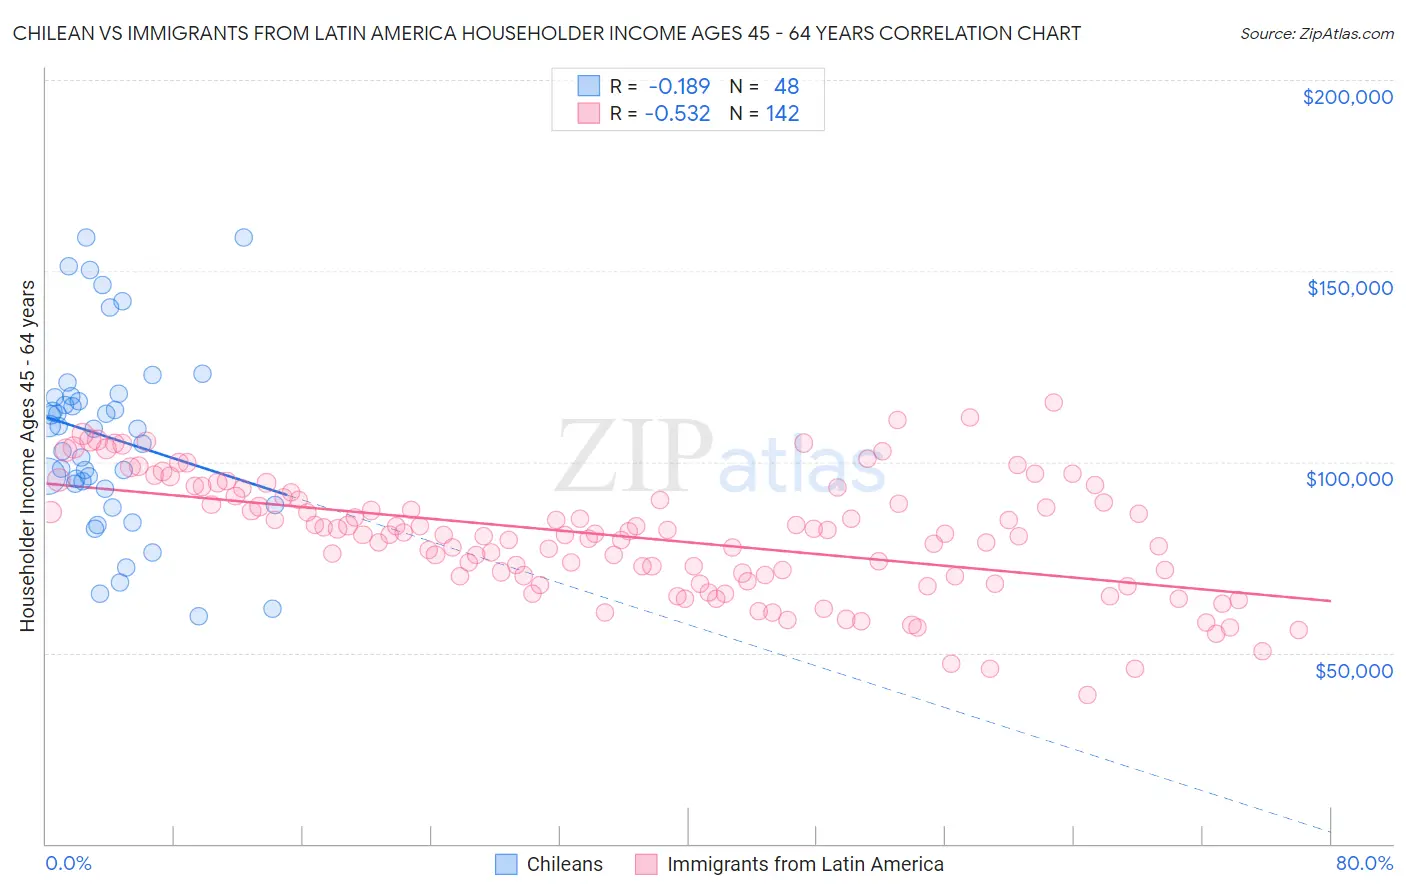 Chilean vs Immigrants from Latin America Householder Income Ages 45 - 64 years